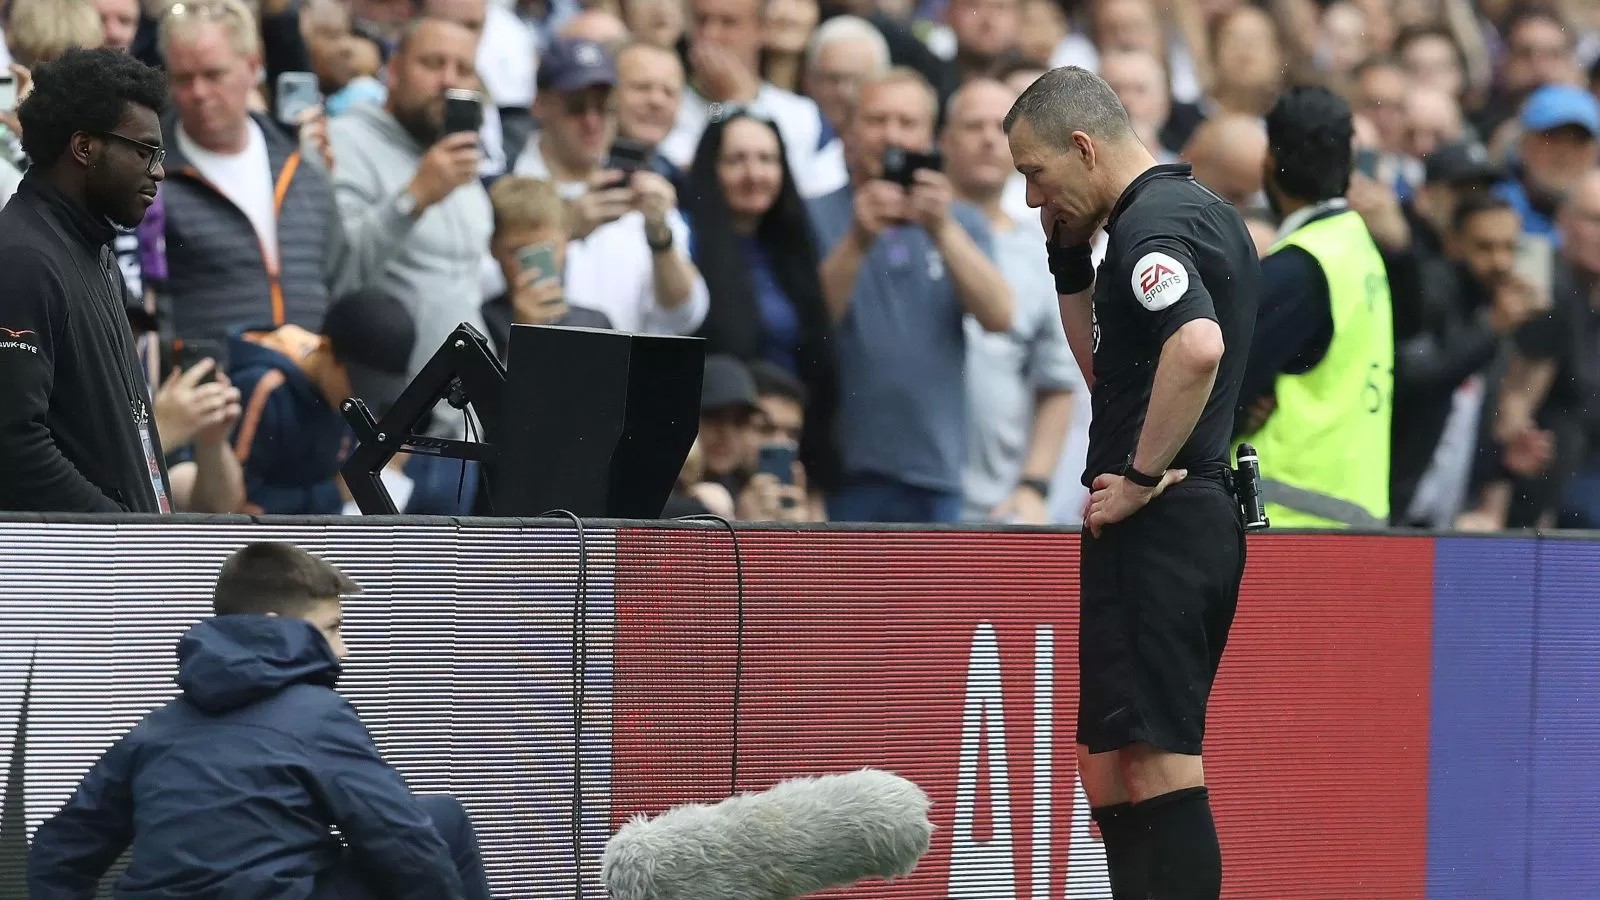 We need to get really f***ing angry about the bullsh*t that is VAR